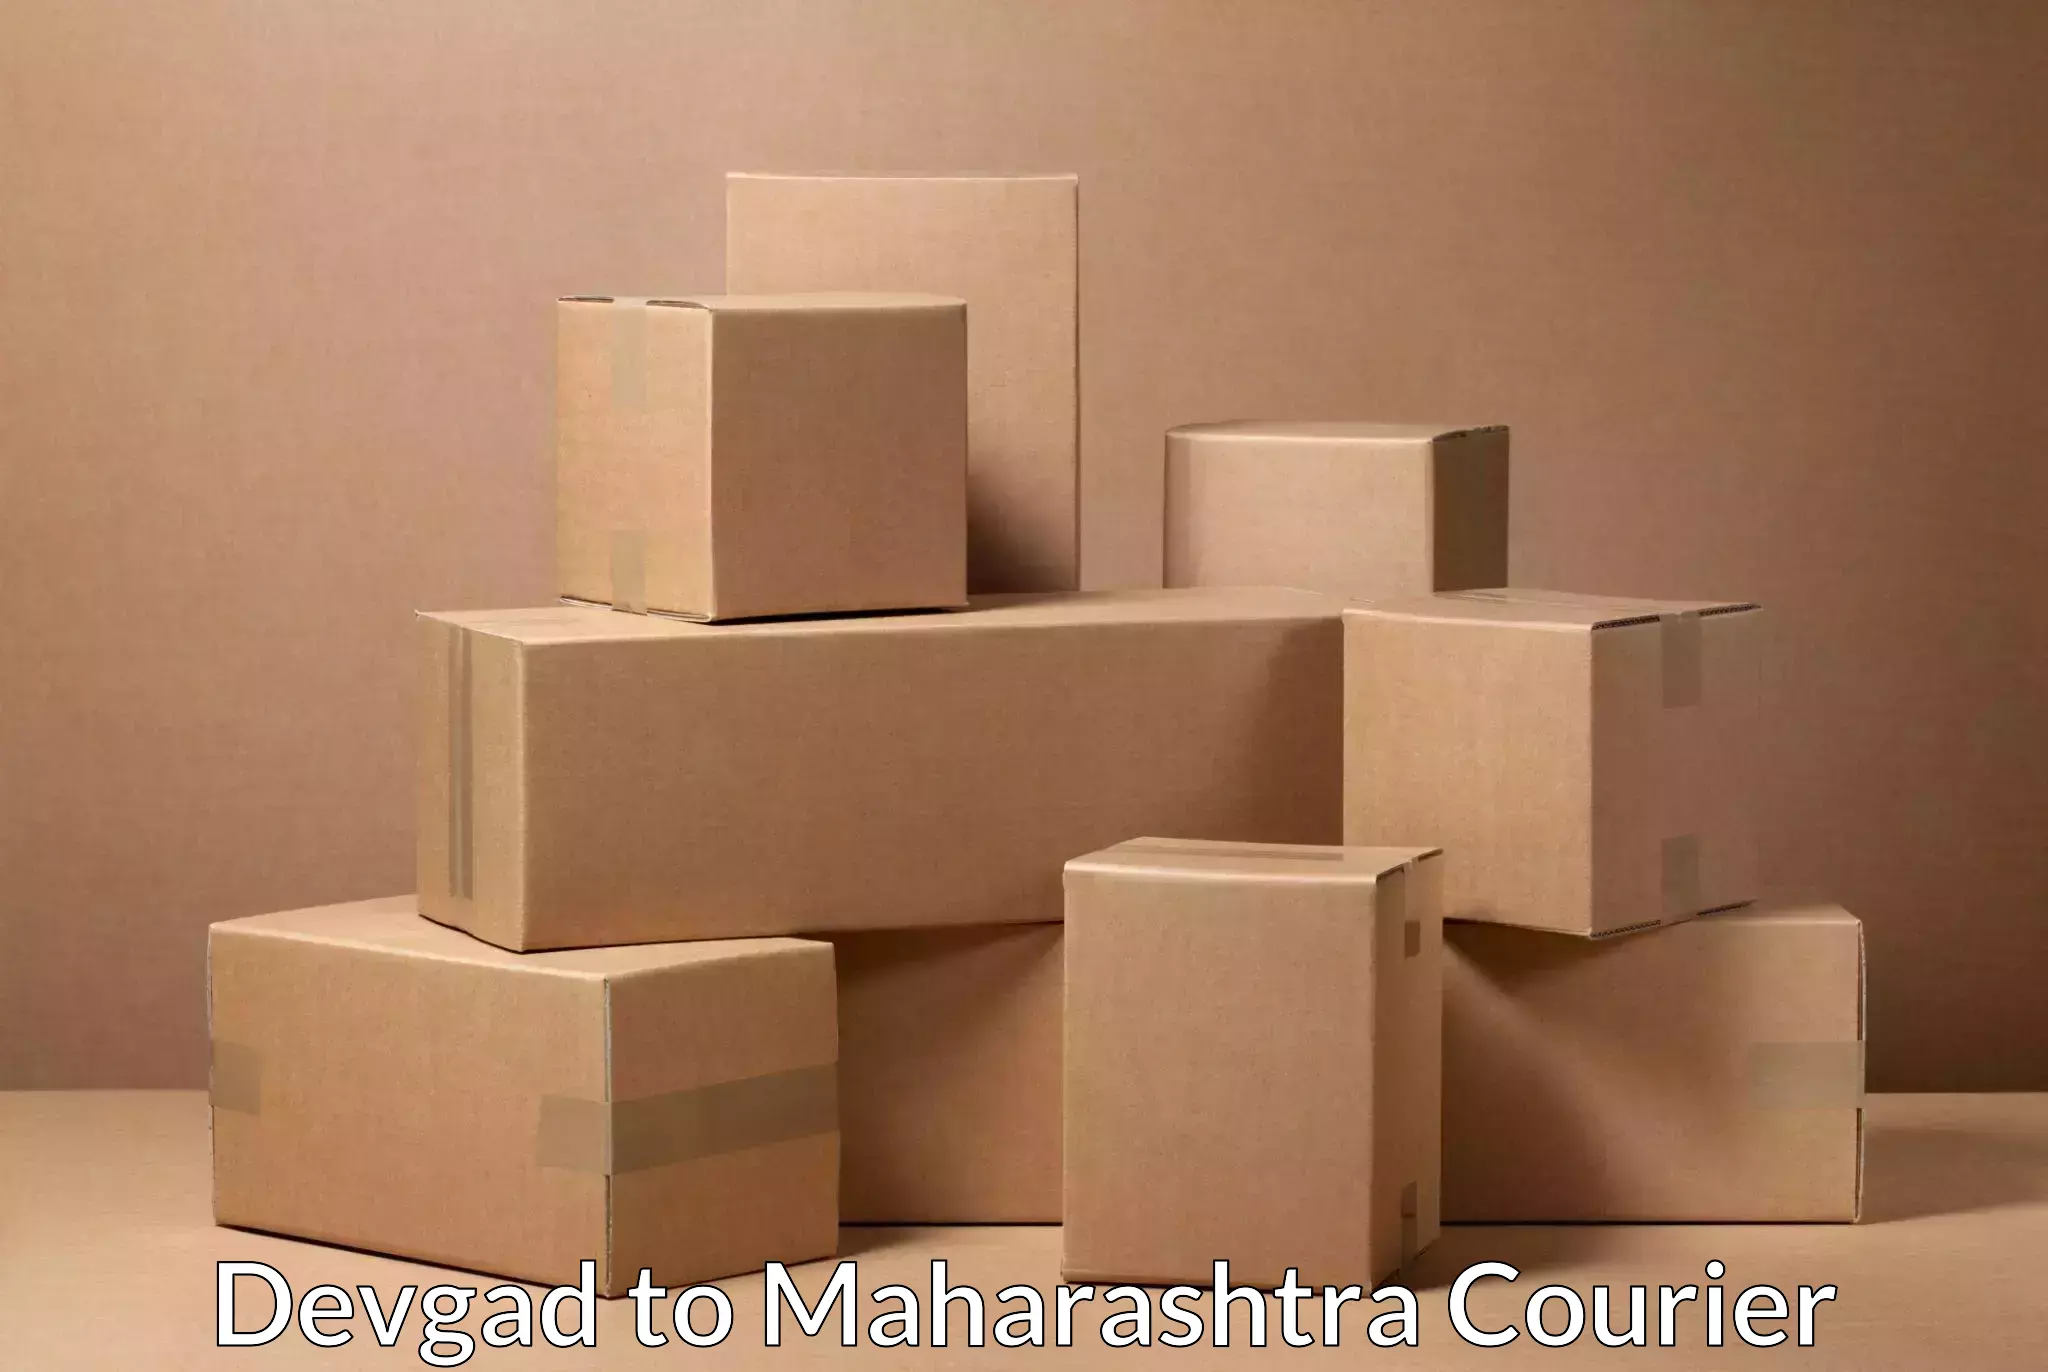 Large package courier Devgad to Mumbai Port